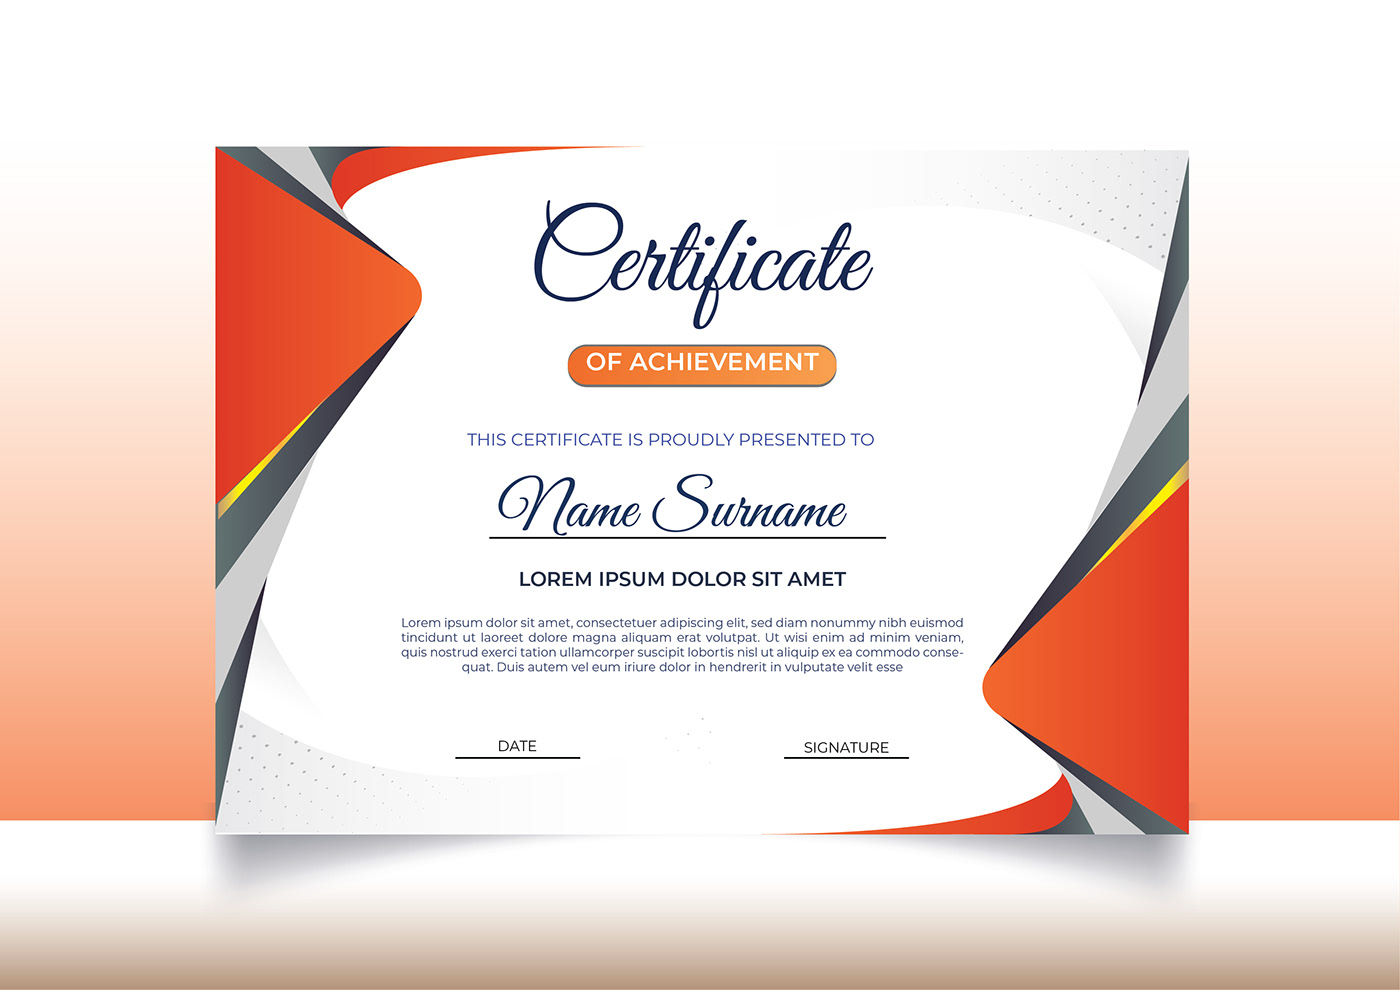 Certificate Design with mockup